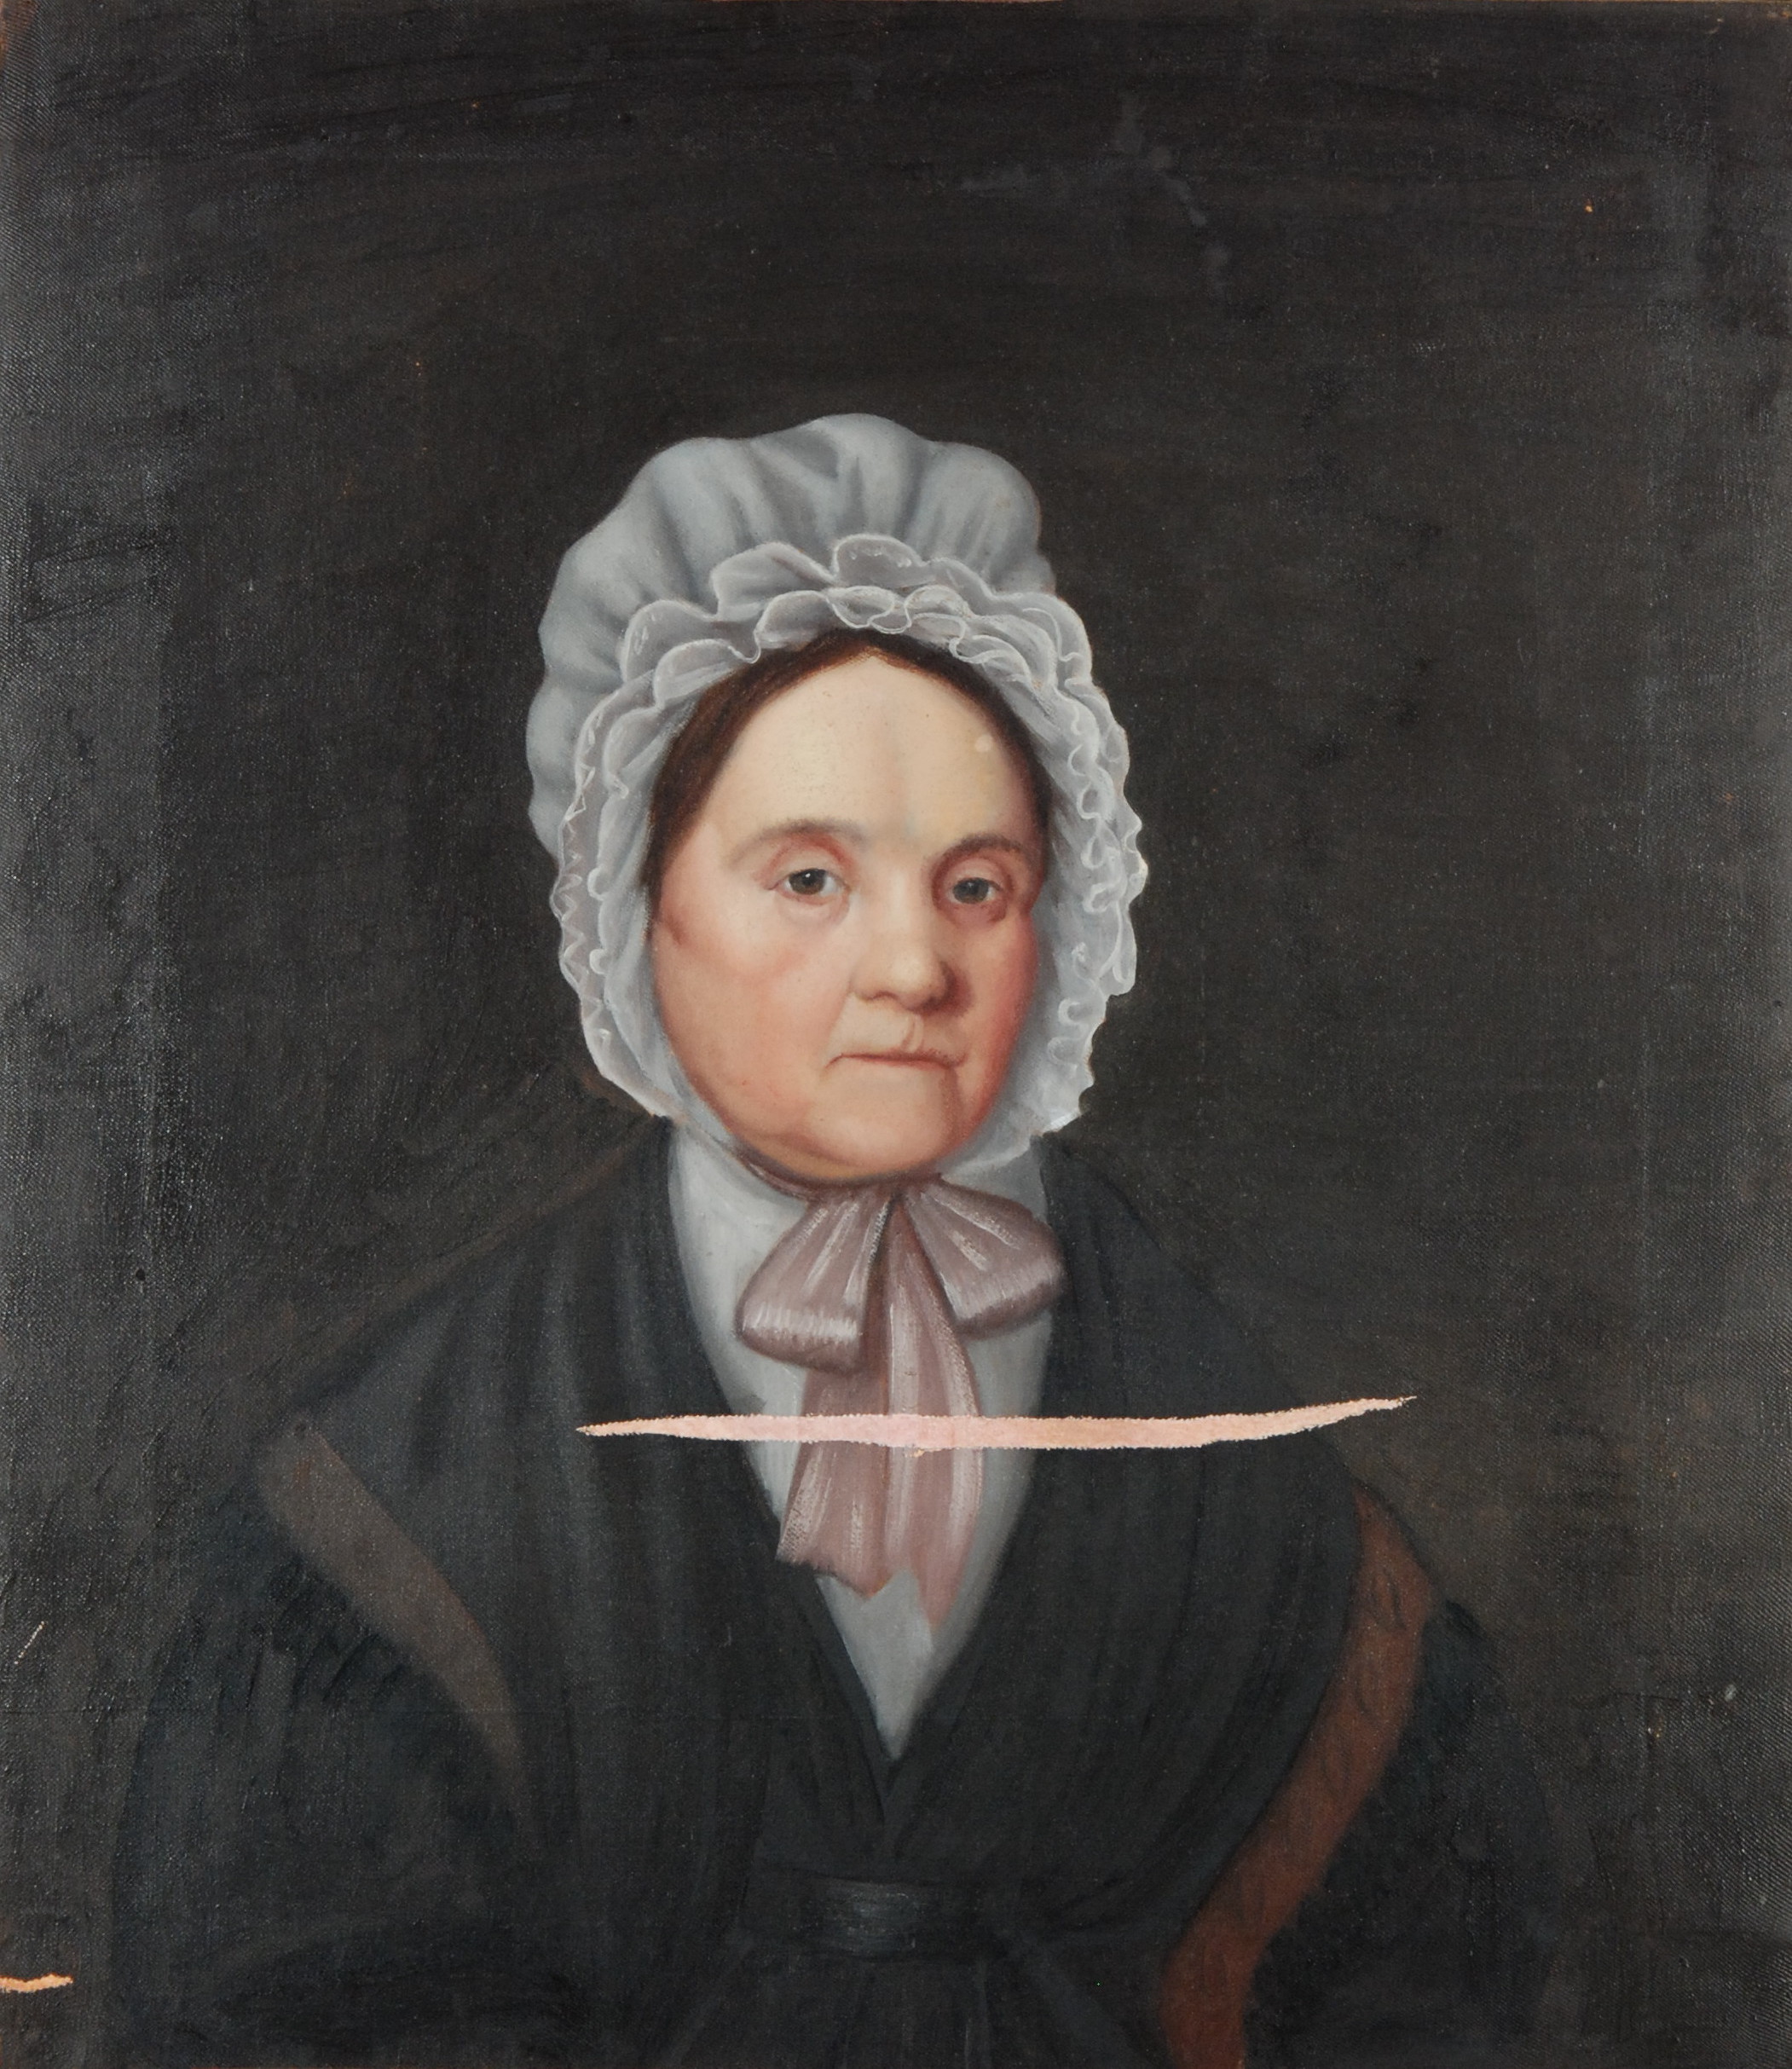 Unidentified Artist, Portrait of Mrs. Willoughby, c. 1830, oil on canvas. This image shows the painting after a fabric insert was applied and locally mended on the reverse. The insert was prepared for retouching and was toned red to approximate the original toning layer.